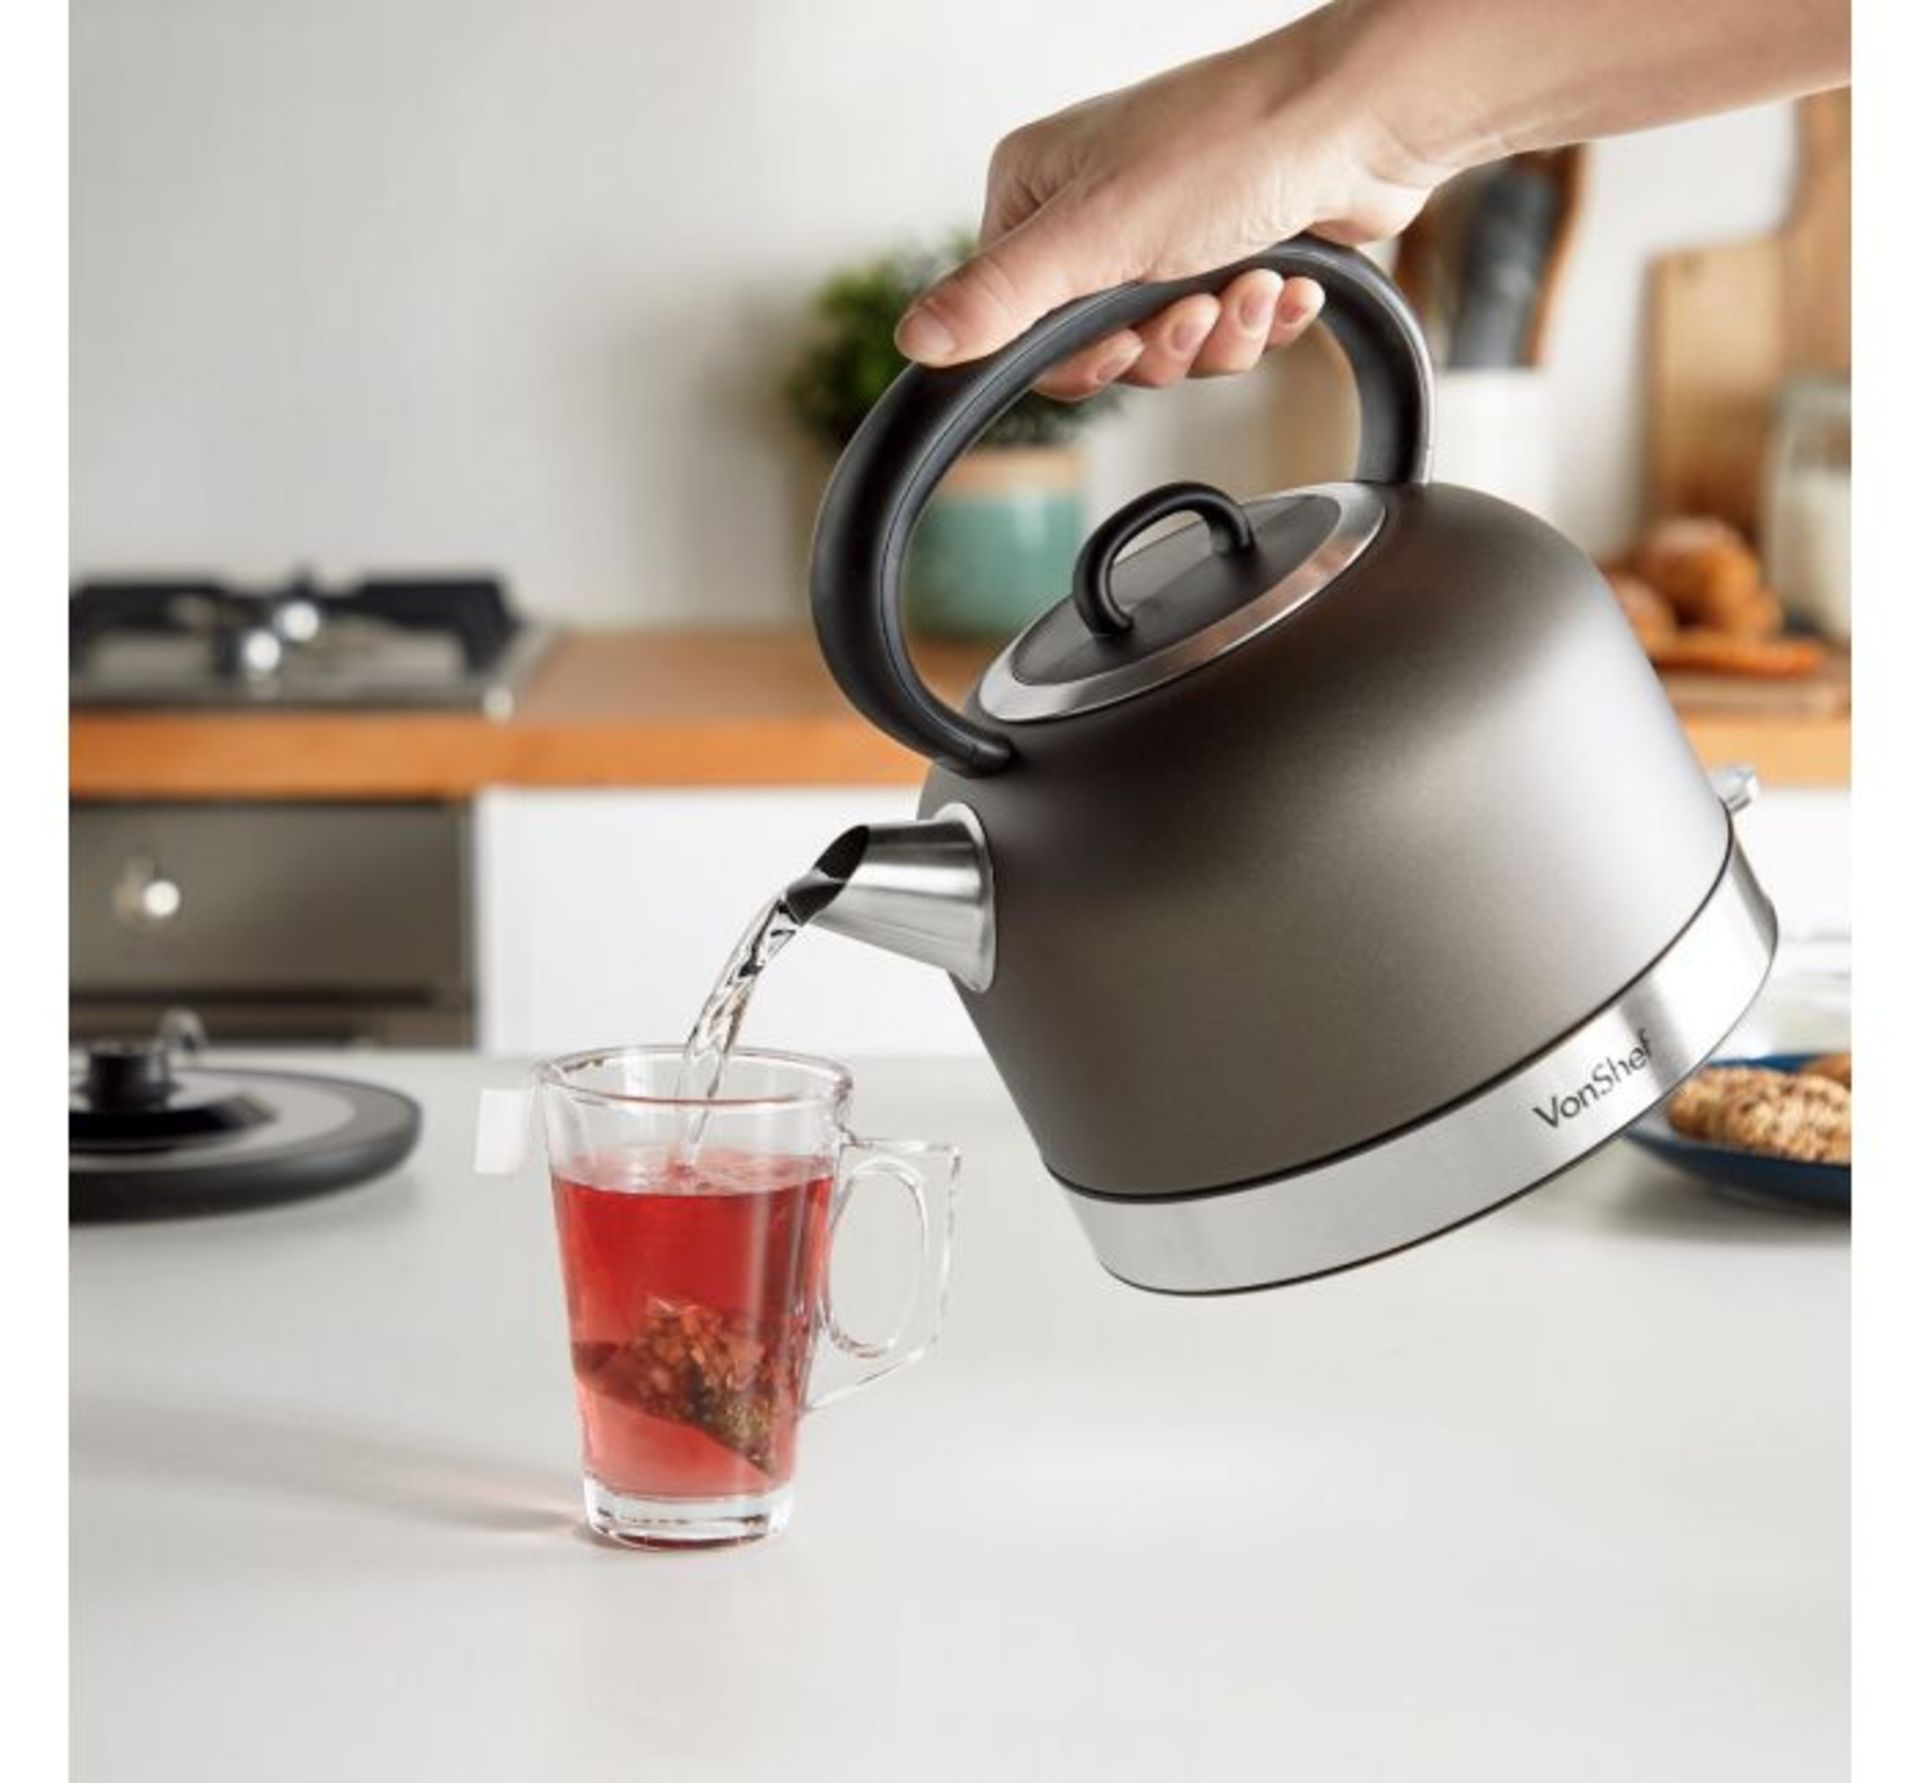 (JH50) 1.5L Dome Kettle Quick boil time can brew a full 1.5L in under 5 minutes Easily remove...